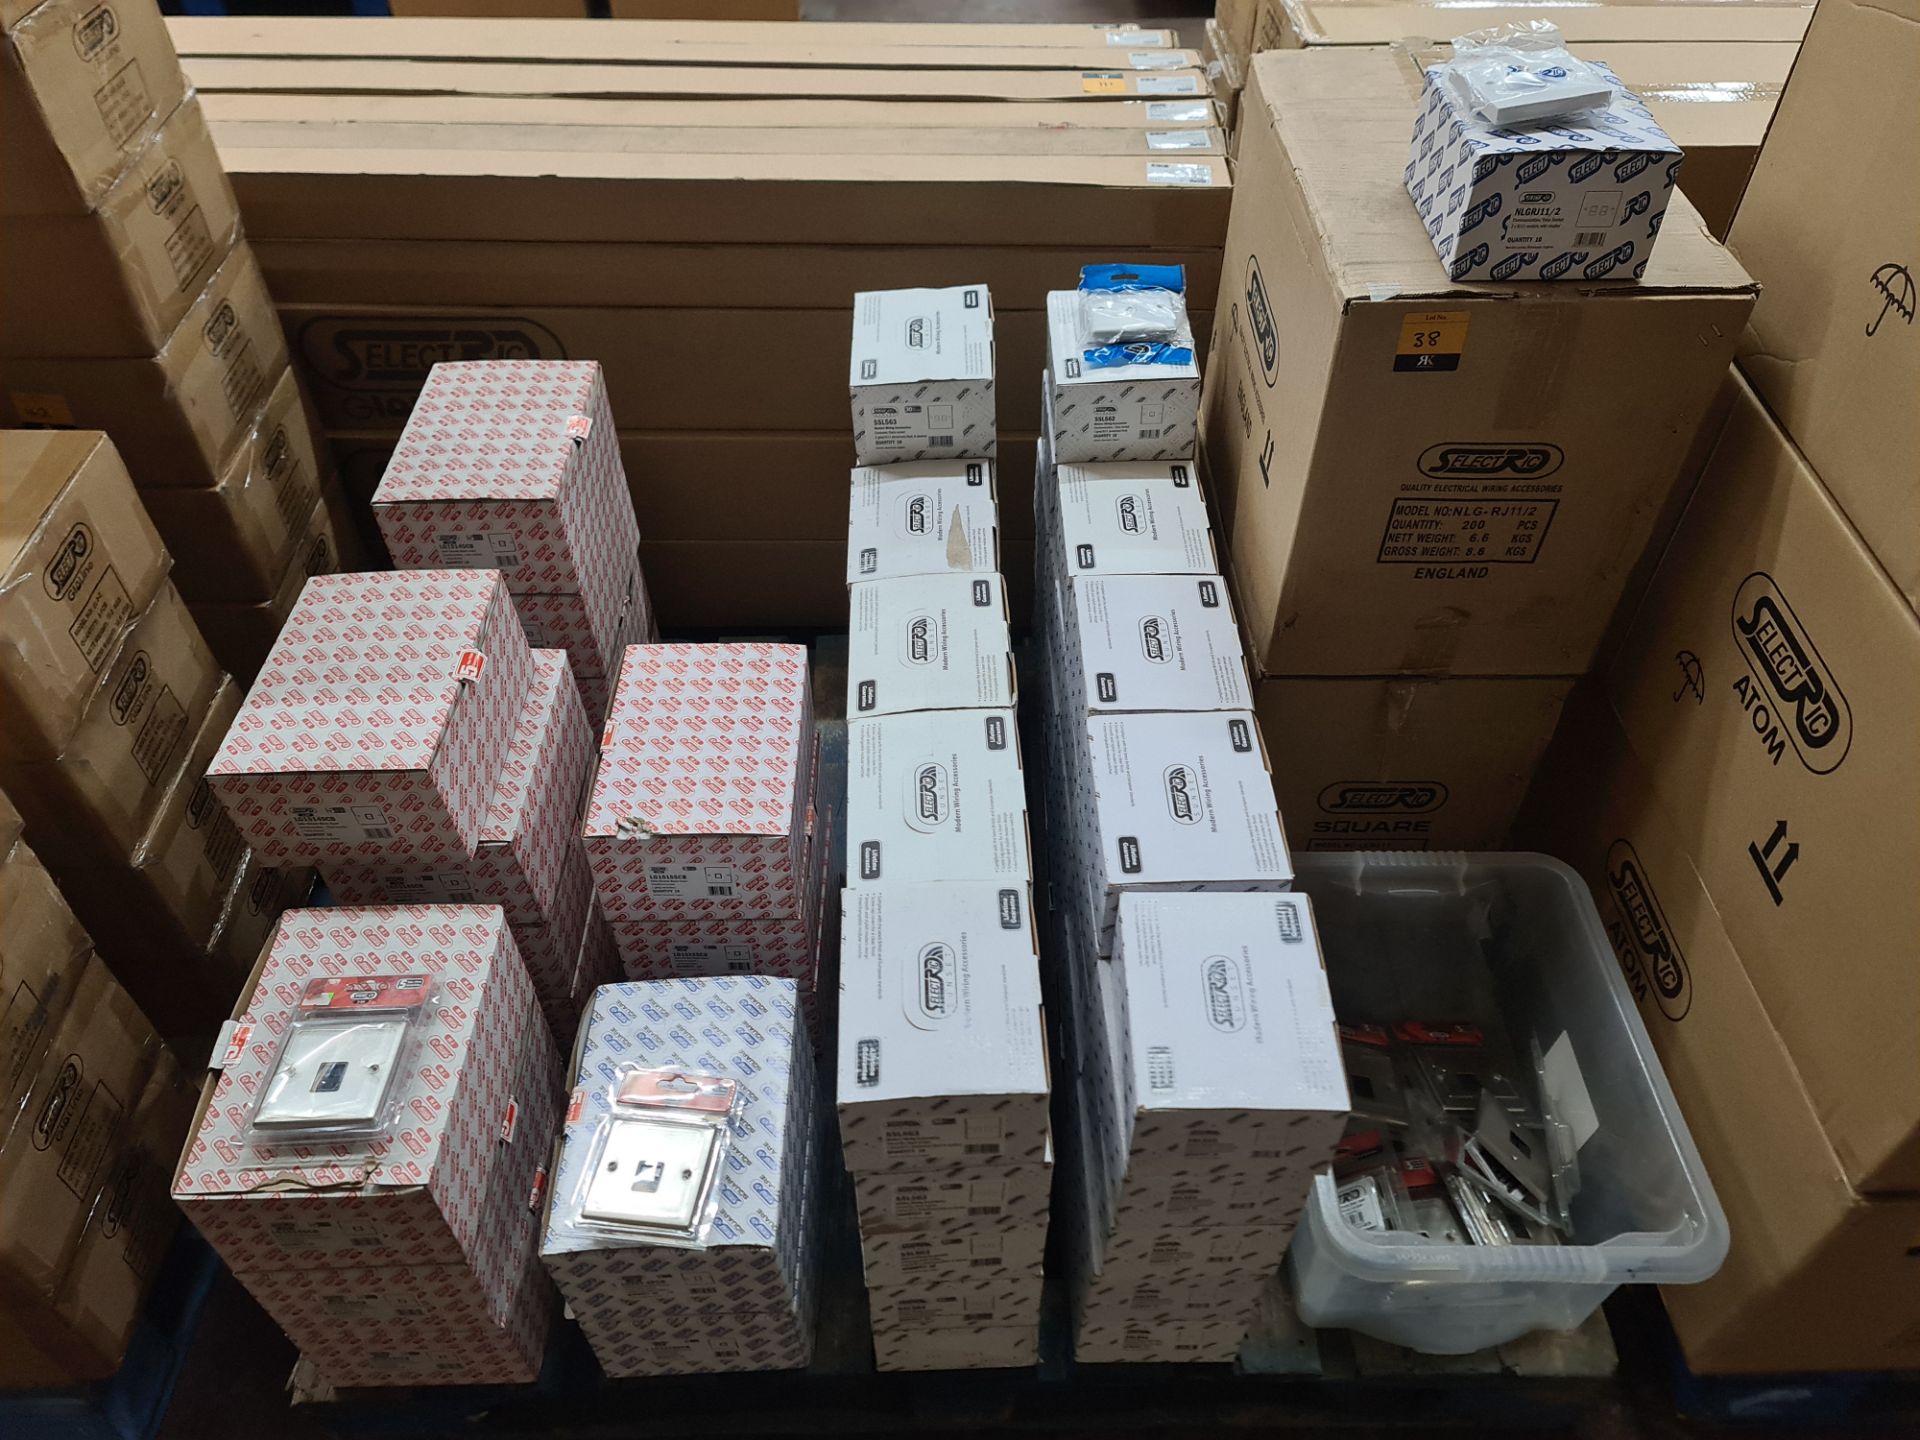 The contents of a pallet of RJ11 sockets. This lot includes a large quantity of satin chrome socket